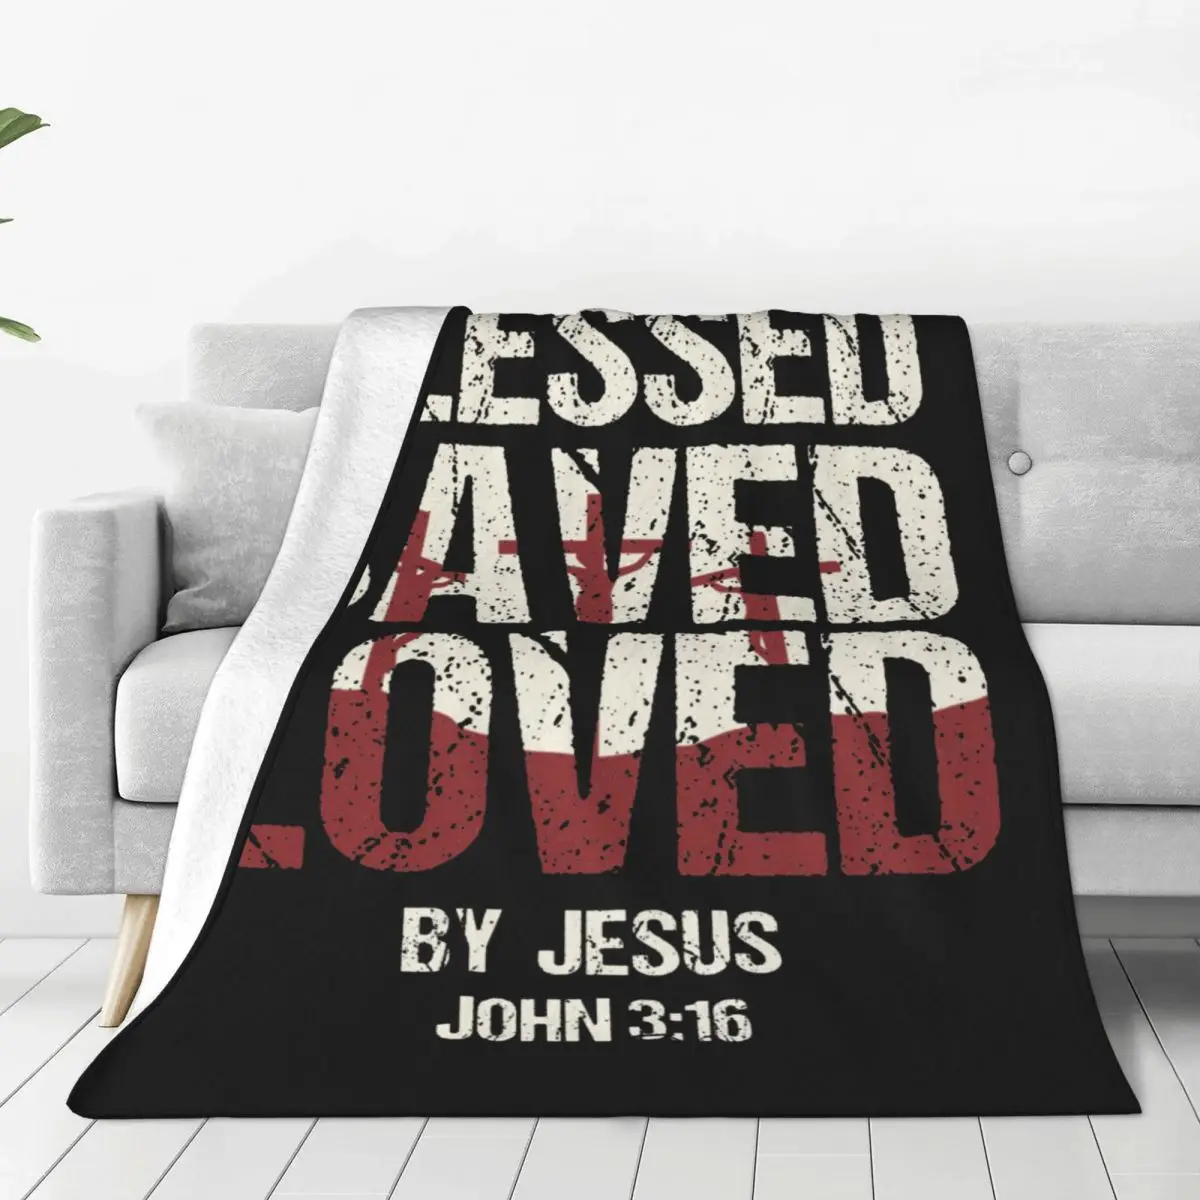 

Christian Faith God Jesus Believer Gift Blessed Saved Loved Blankets Wool Awesome Soft Throw Blanket for Home Restaurant